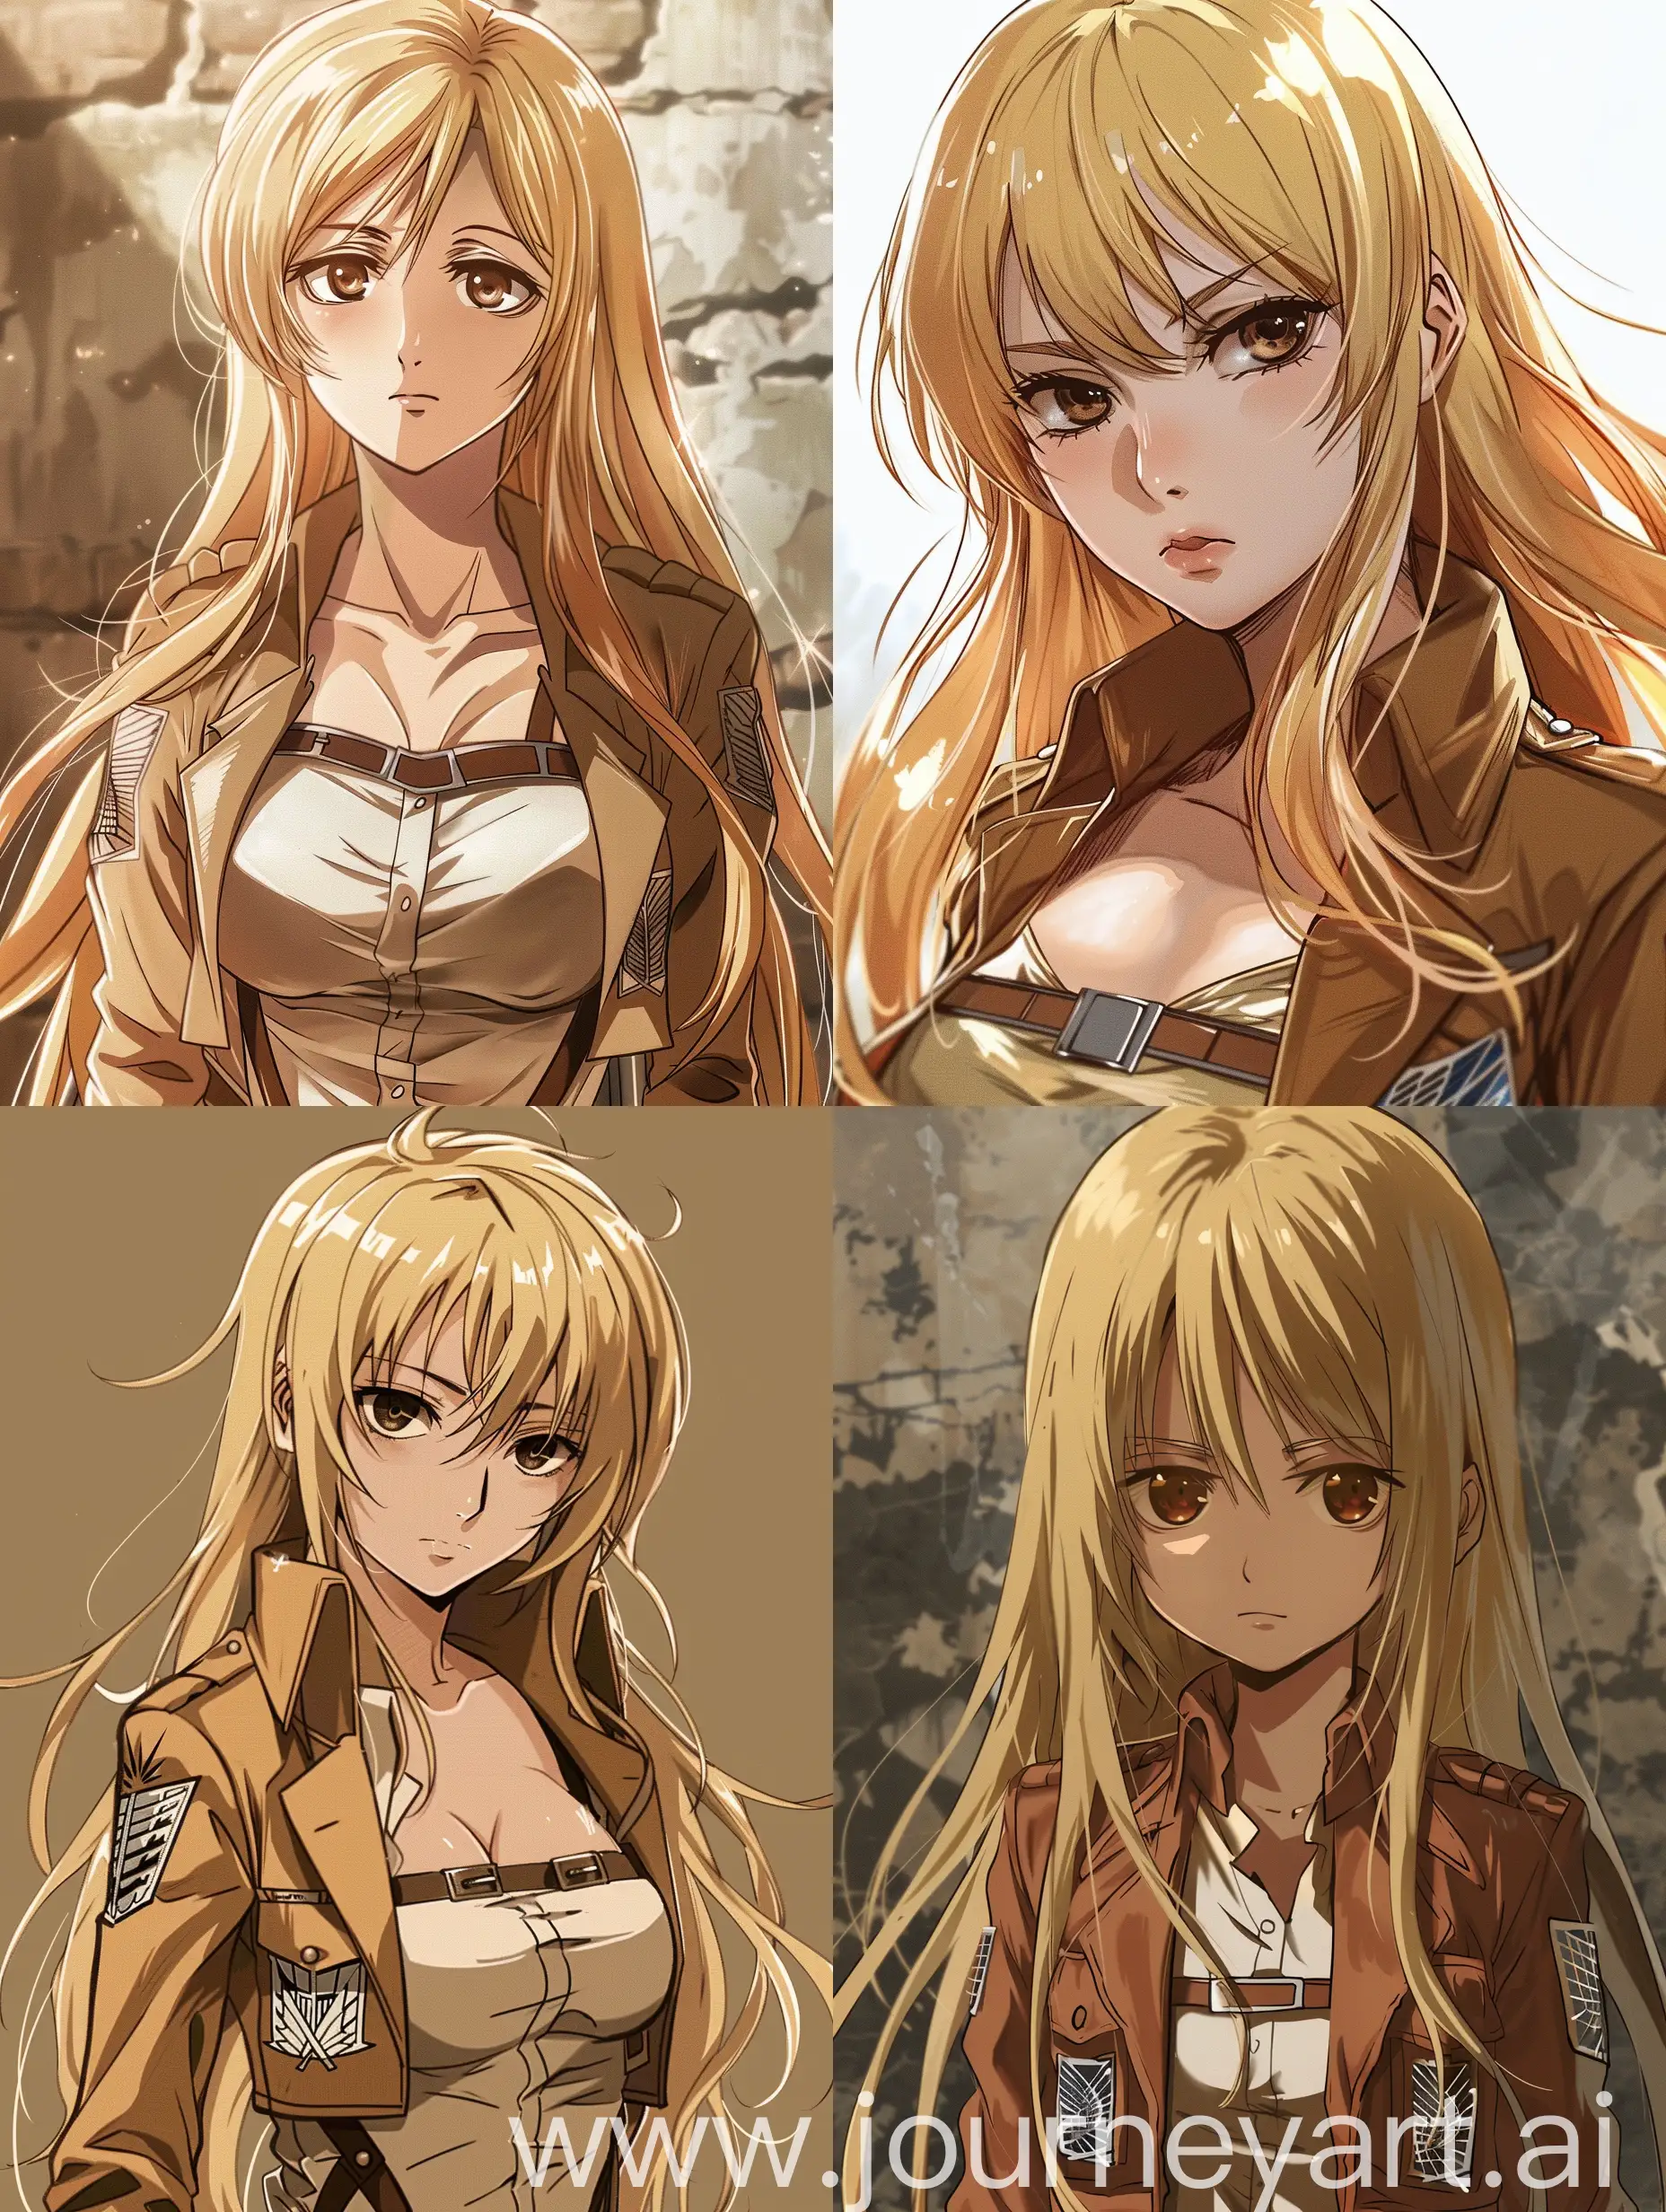 Attractive-Blonde-Girl-in-Retro-Style-Survey-Corps-Member-from-Attack-on-Titan